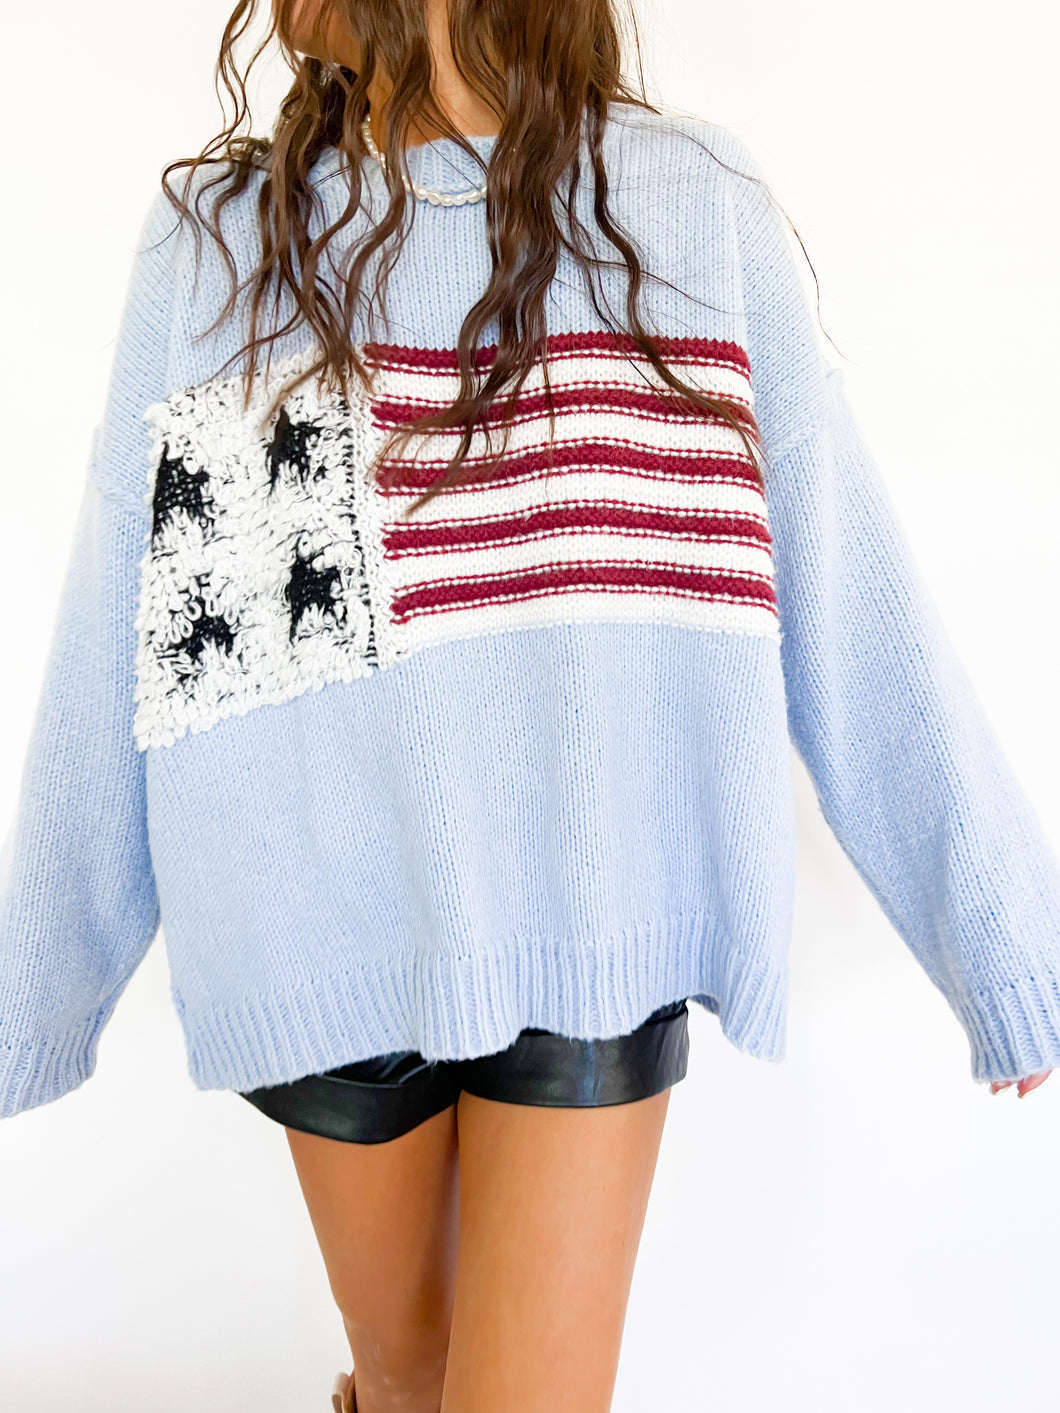 THE PATRIOT SWEATER